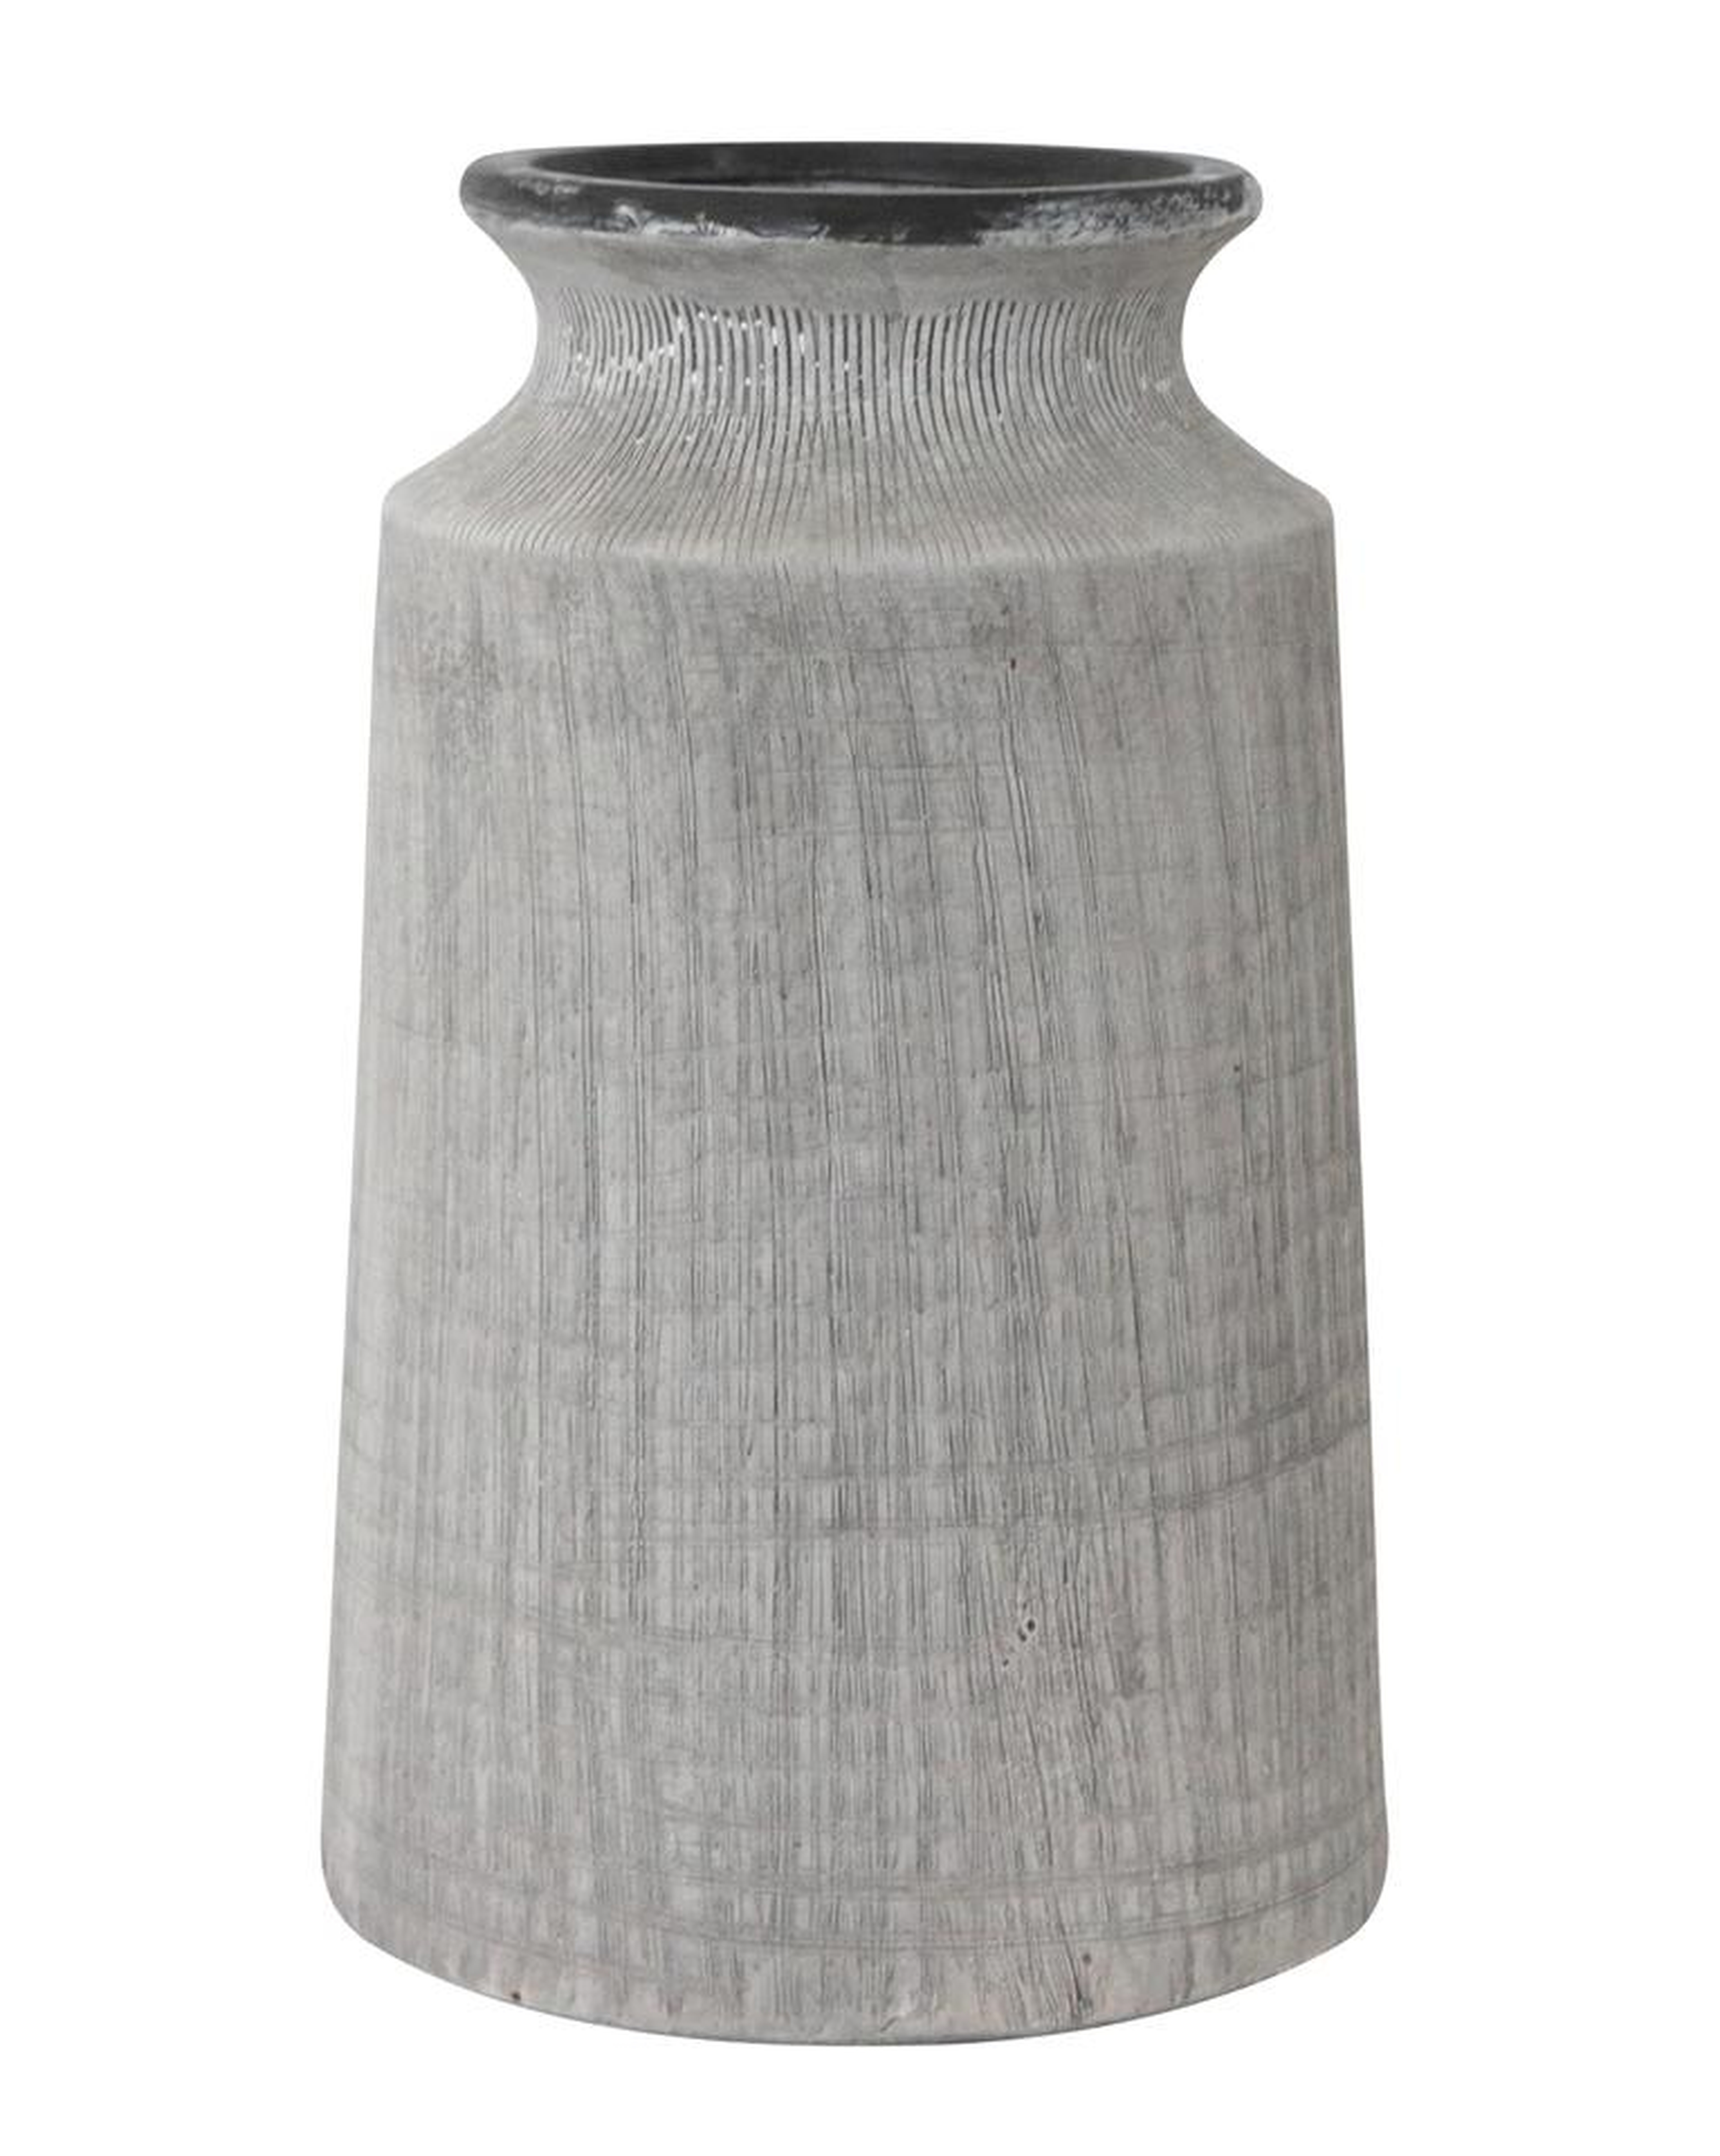 WASHED CHARCOAL FLOWER VASE - McGee & Co.